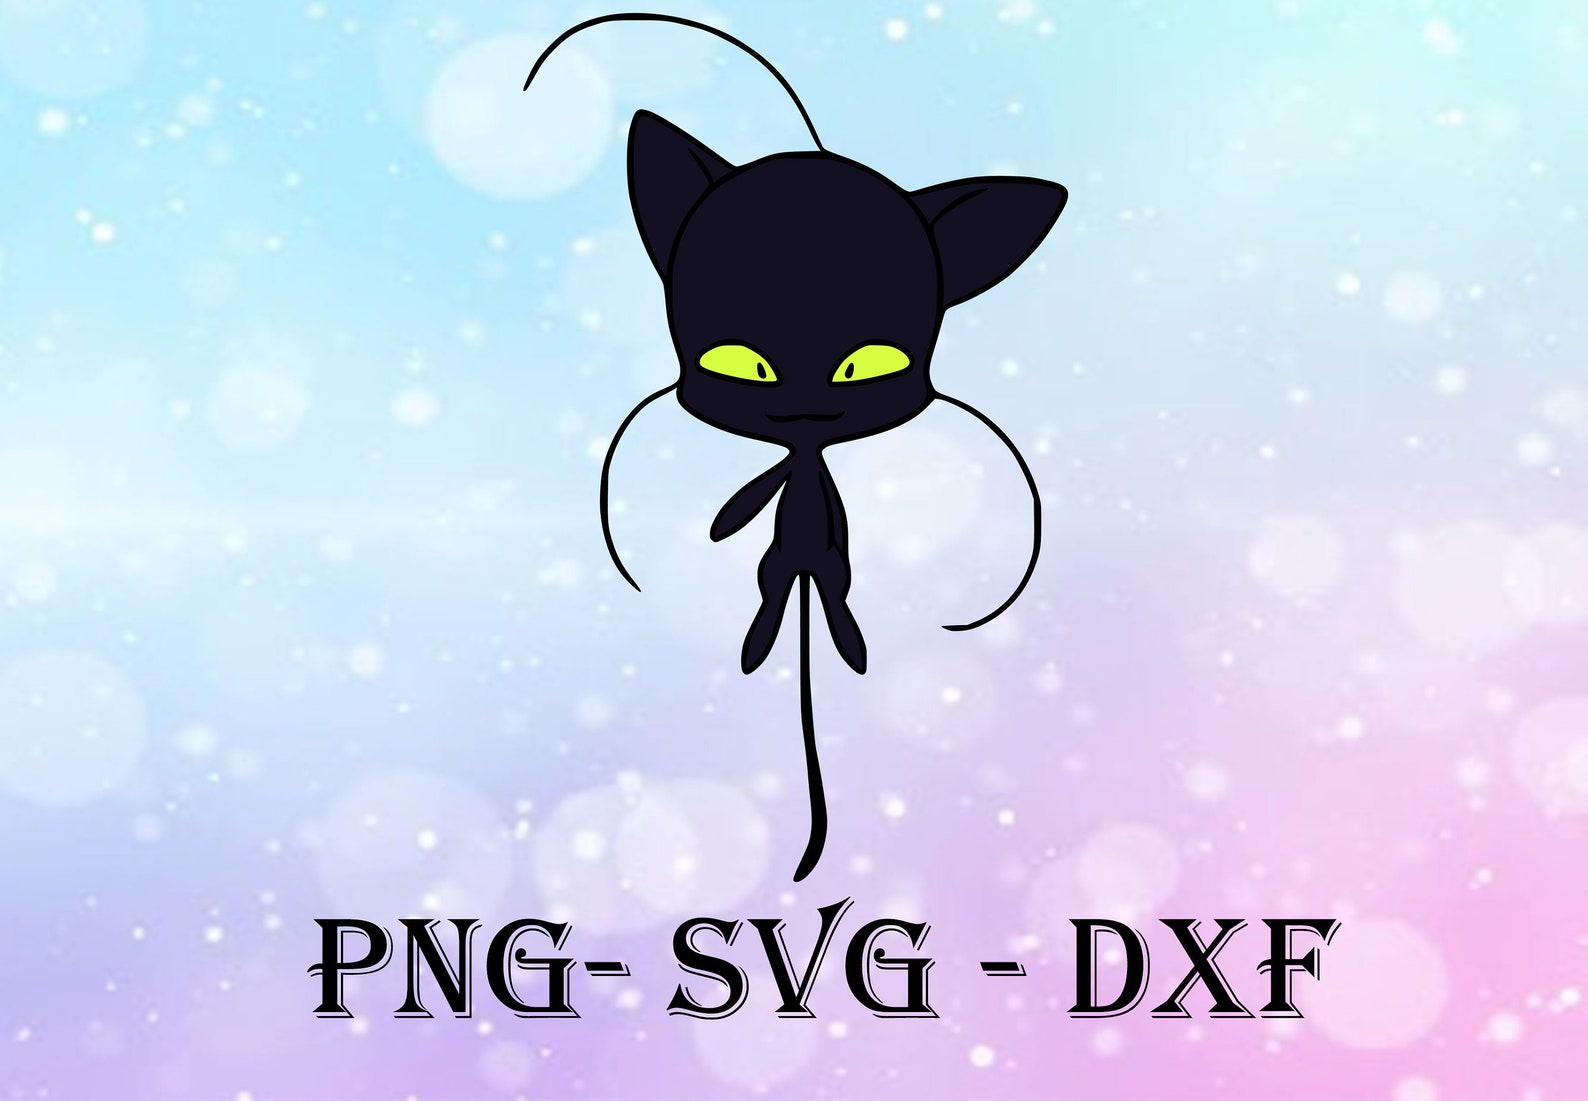 Miraculous Ladybug: Cute Plagg svg dxf png Miraculous | Etsy